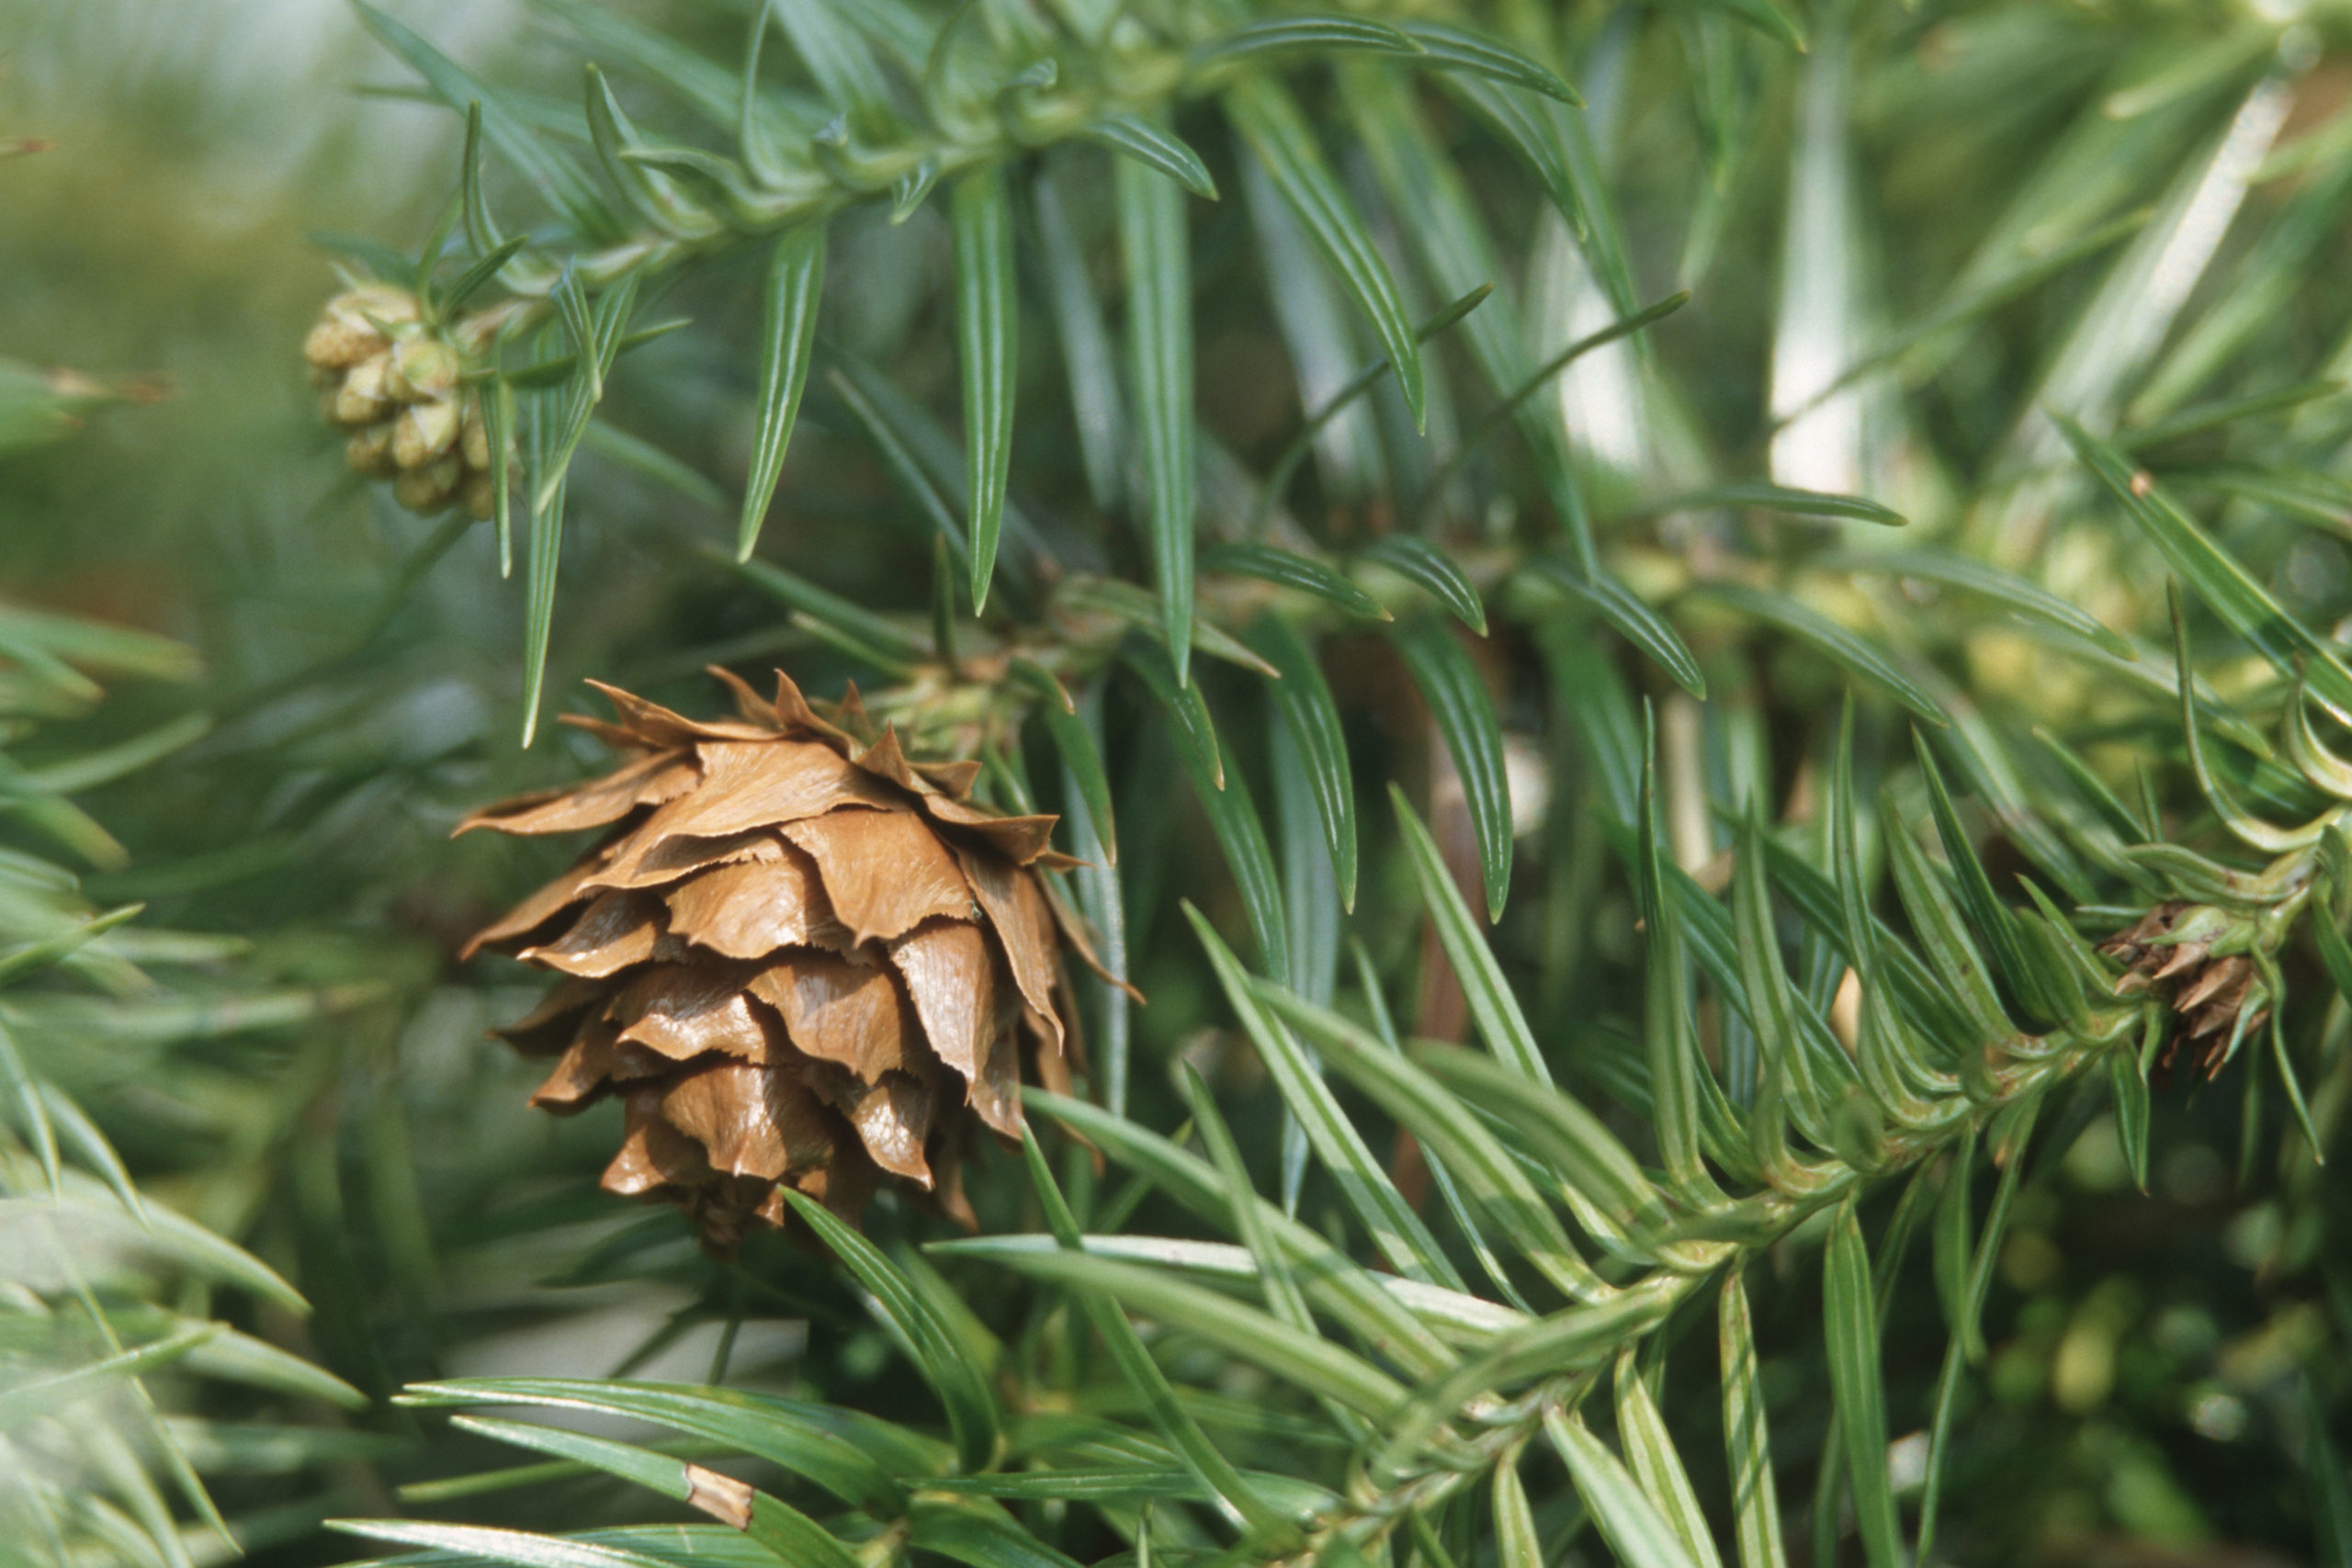 A close-up of the China fir (Image: Blickwinkel / Alamy)